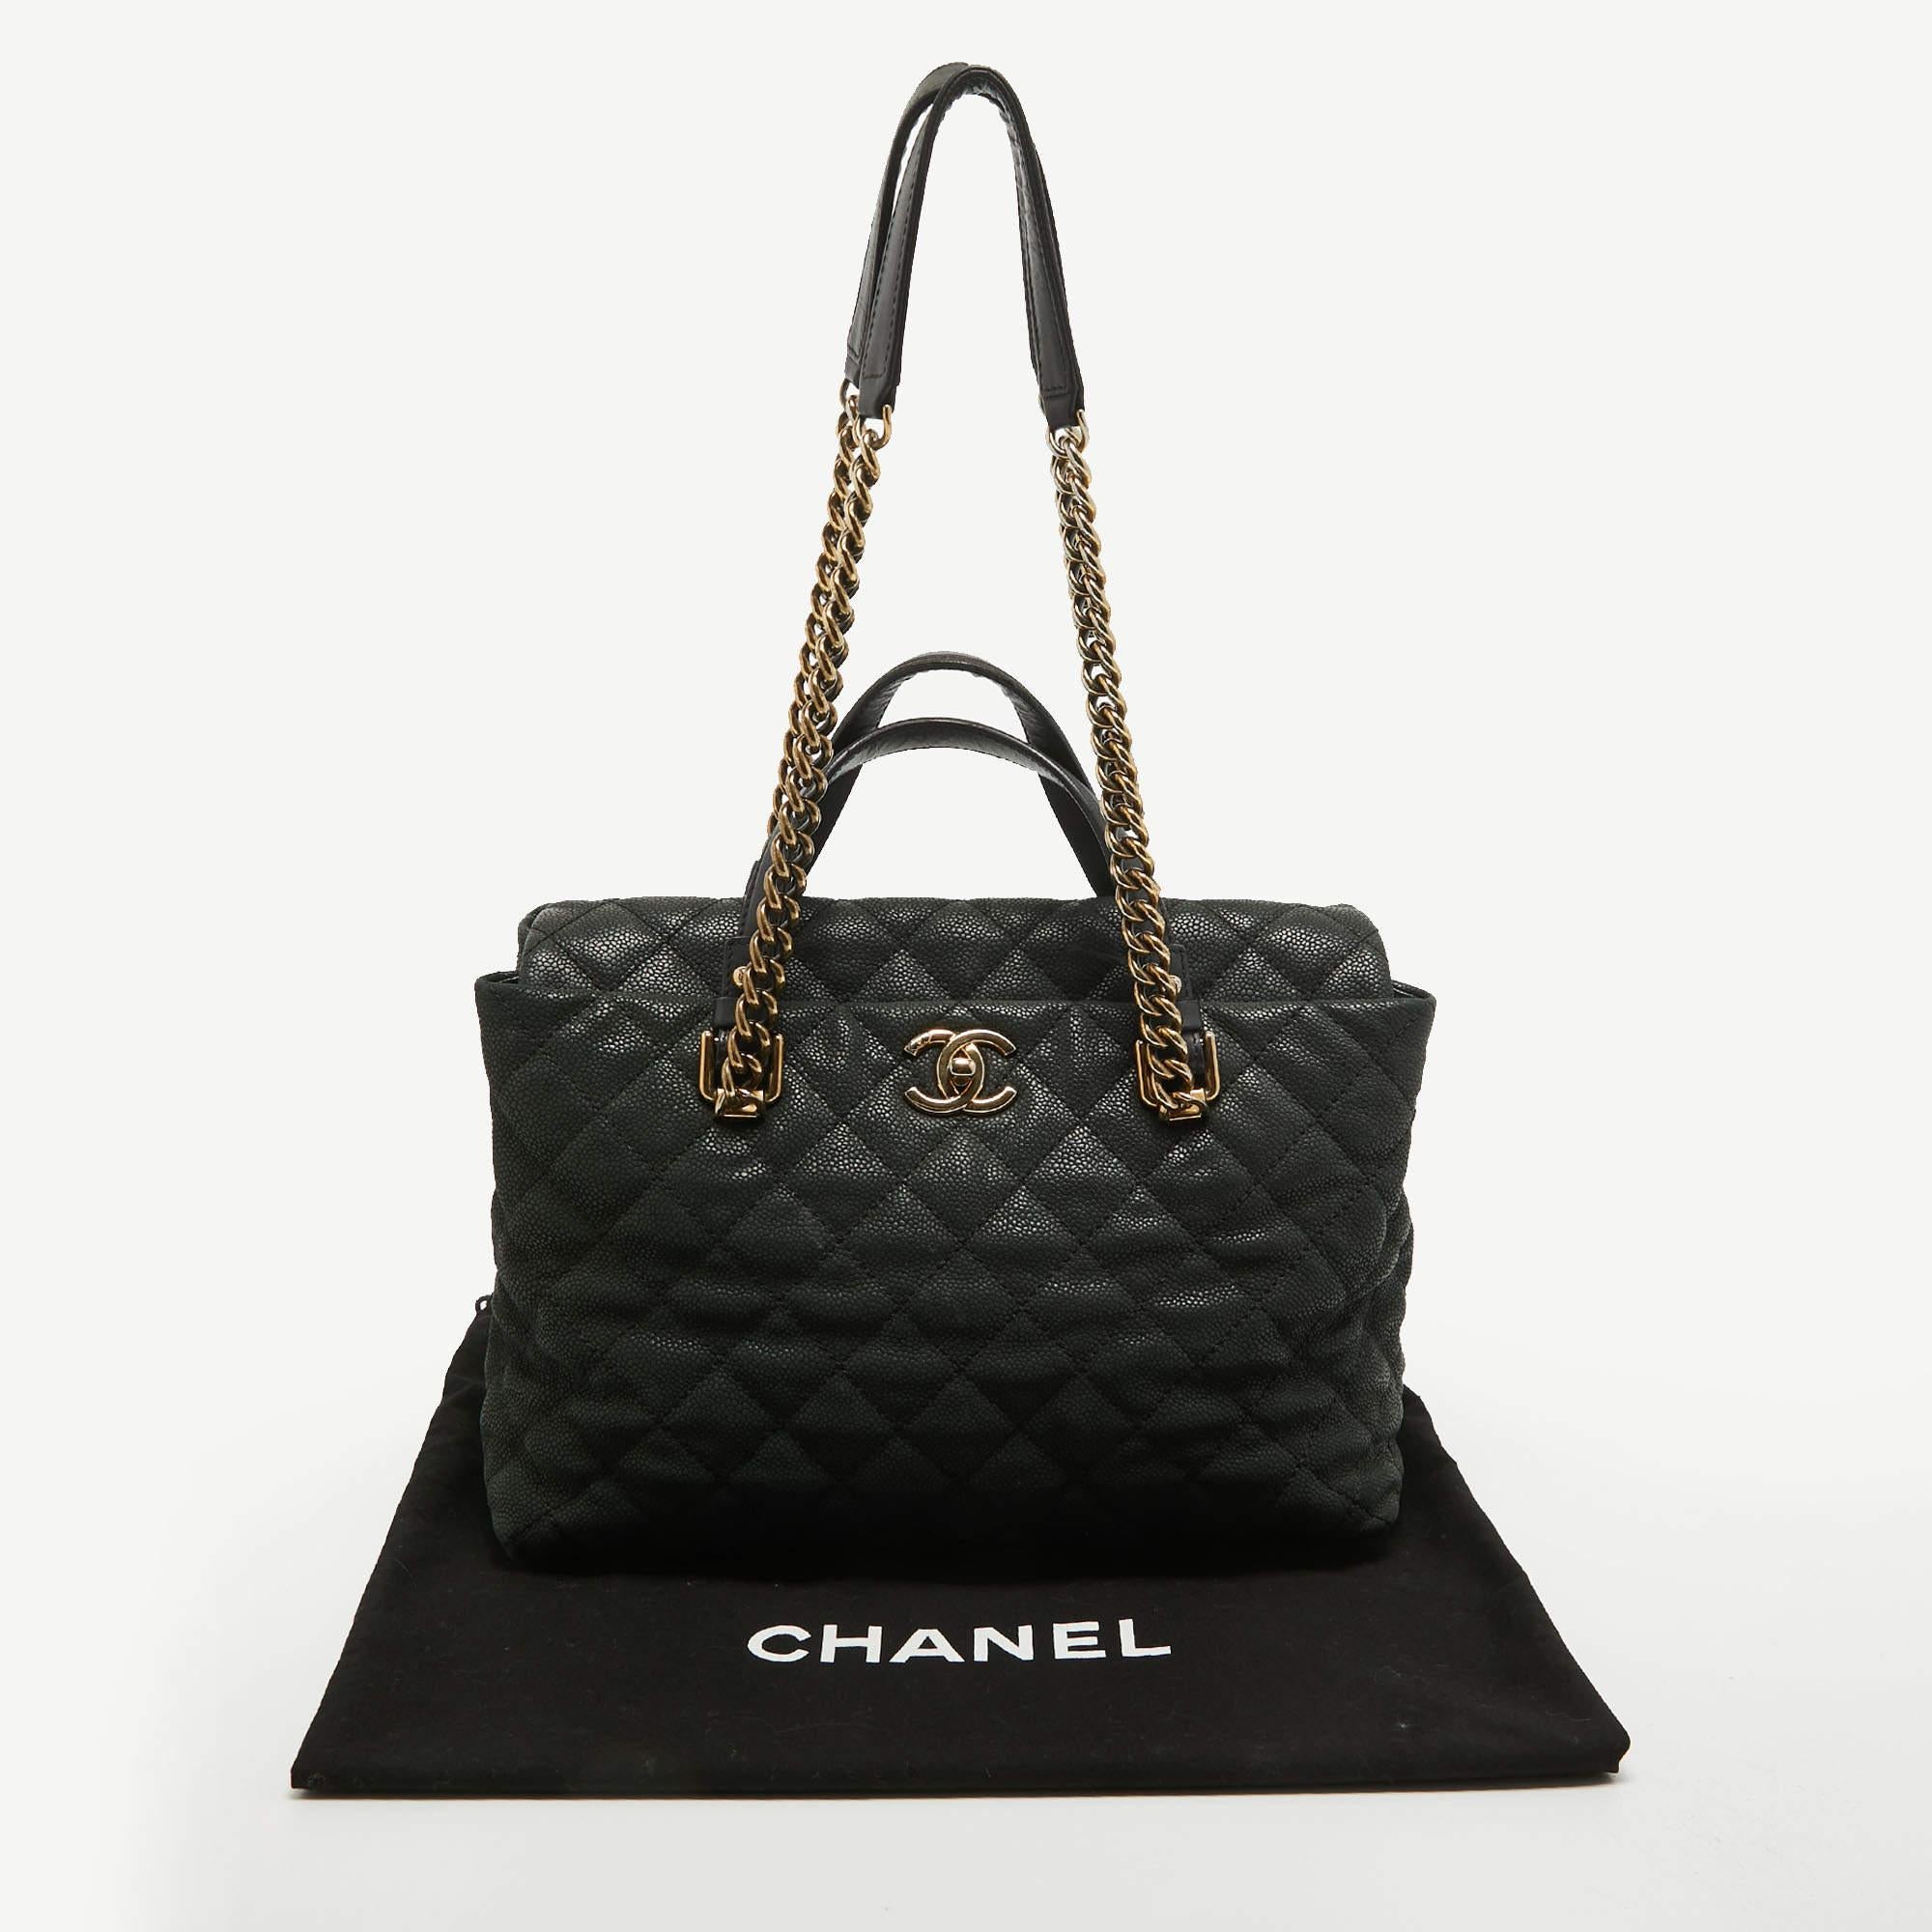 Chanel Black Caviar Leather Chic Quilt Tote 15